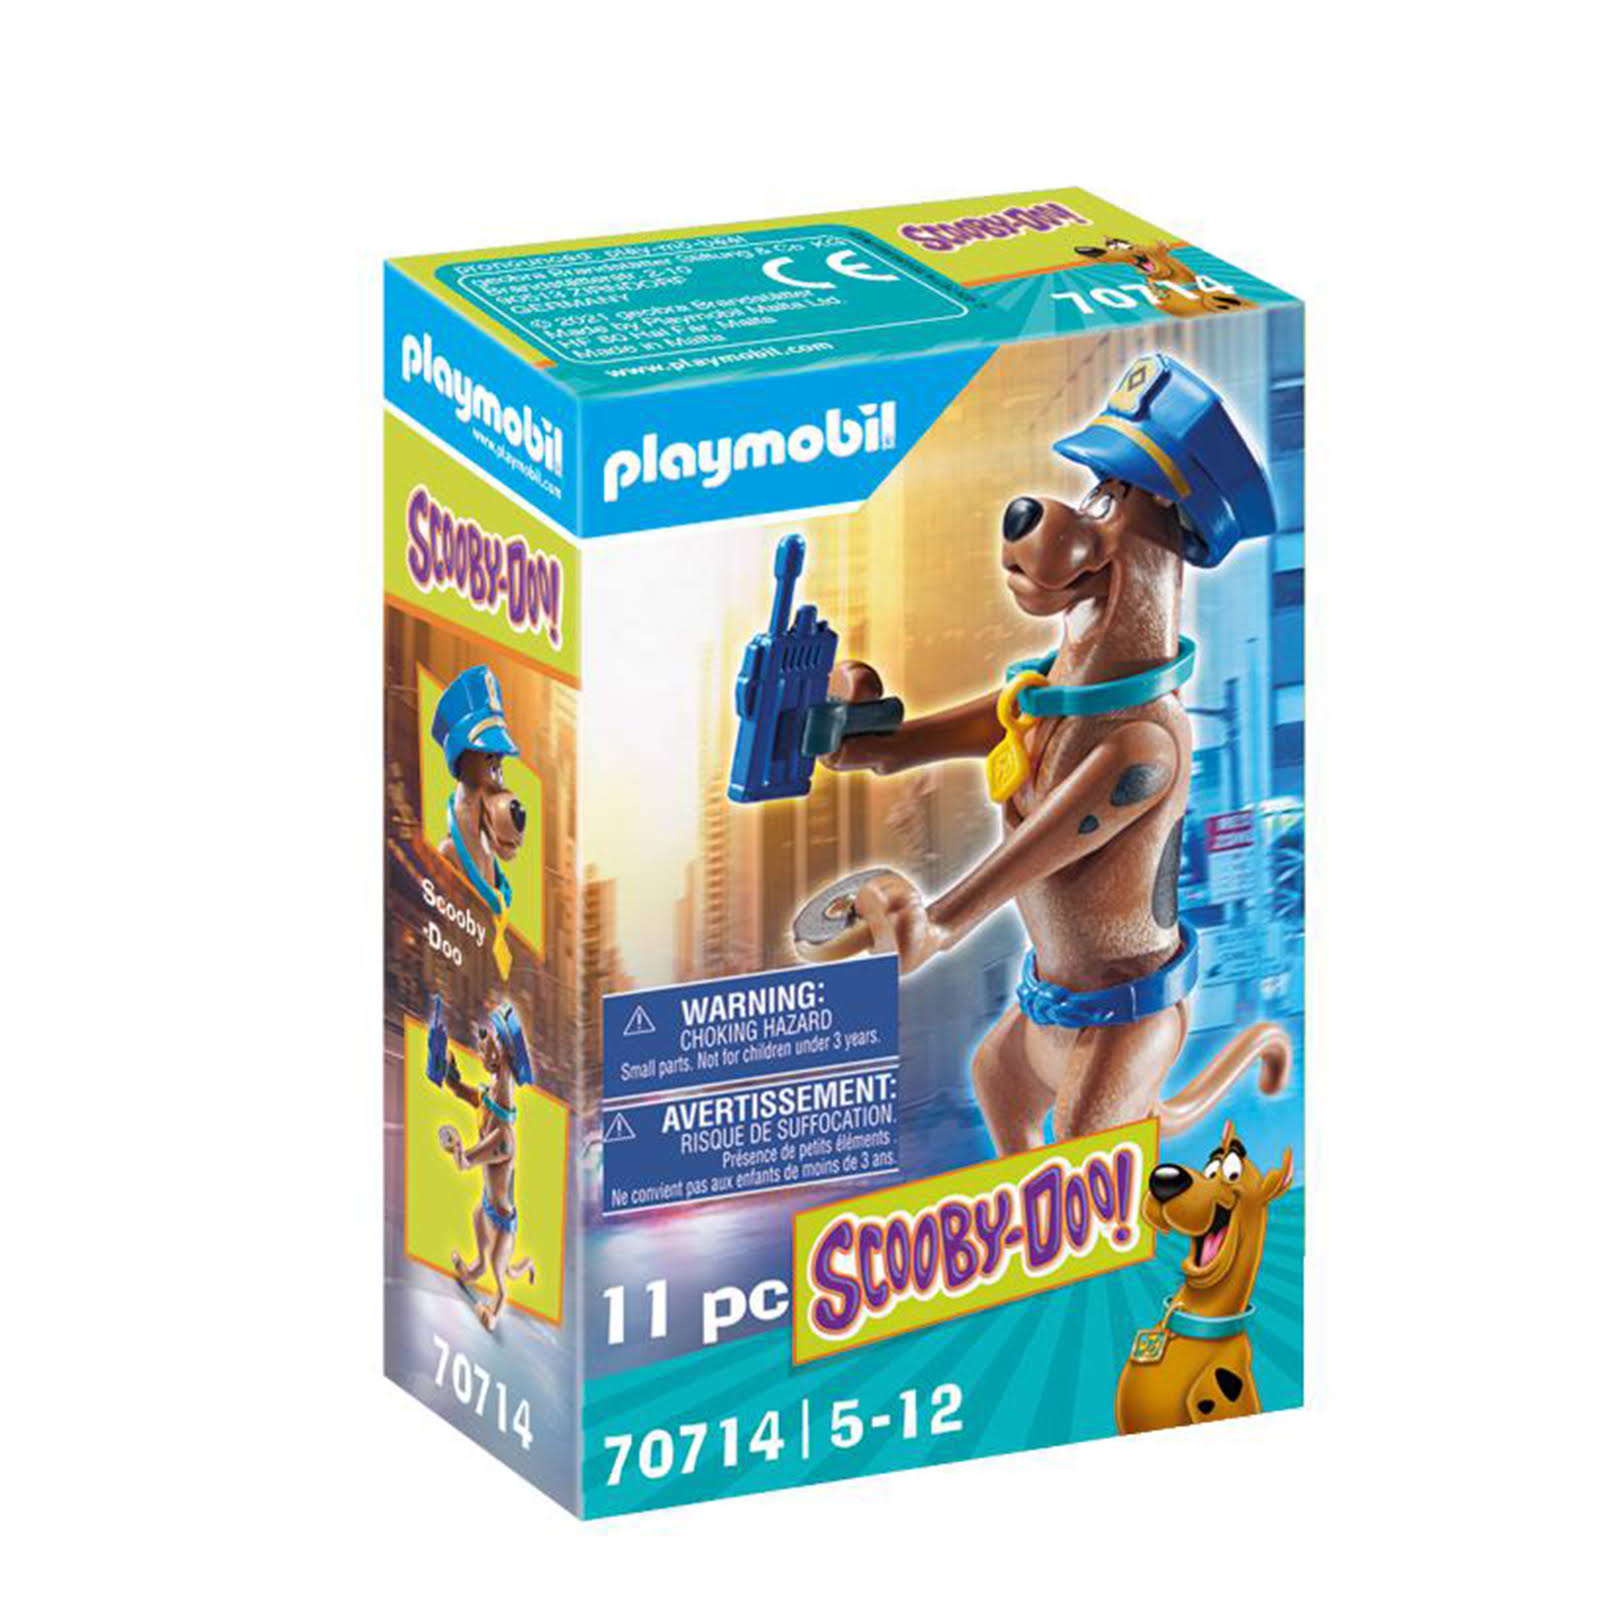 Playmobil 70714 - Scooby-Doo! Collectible Police Figure